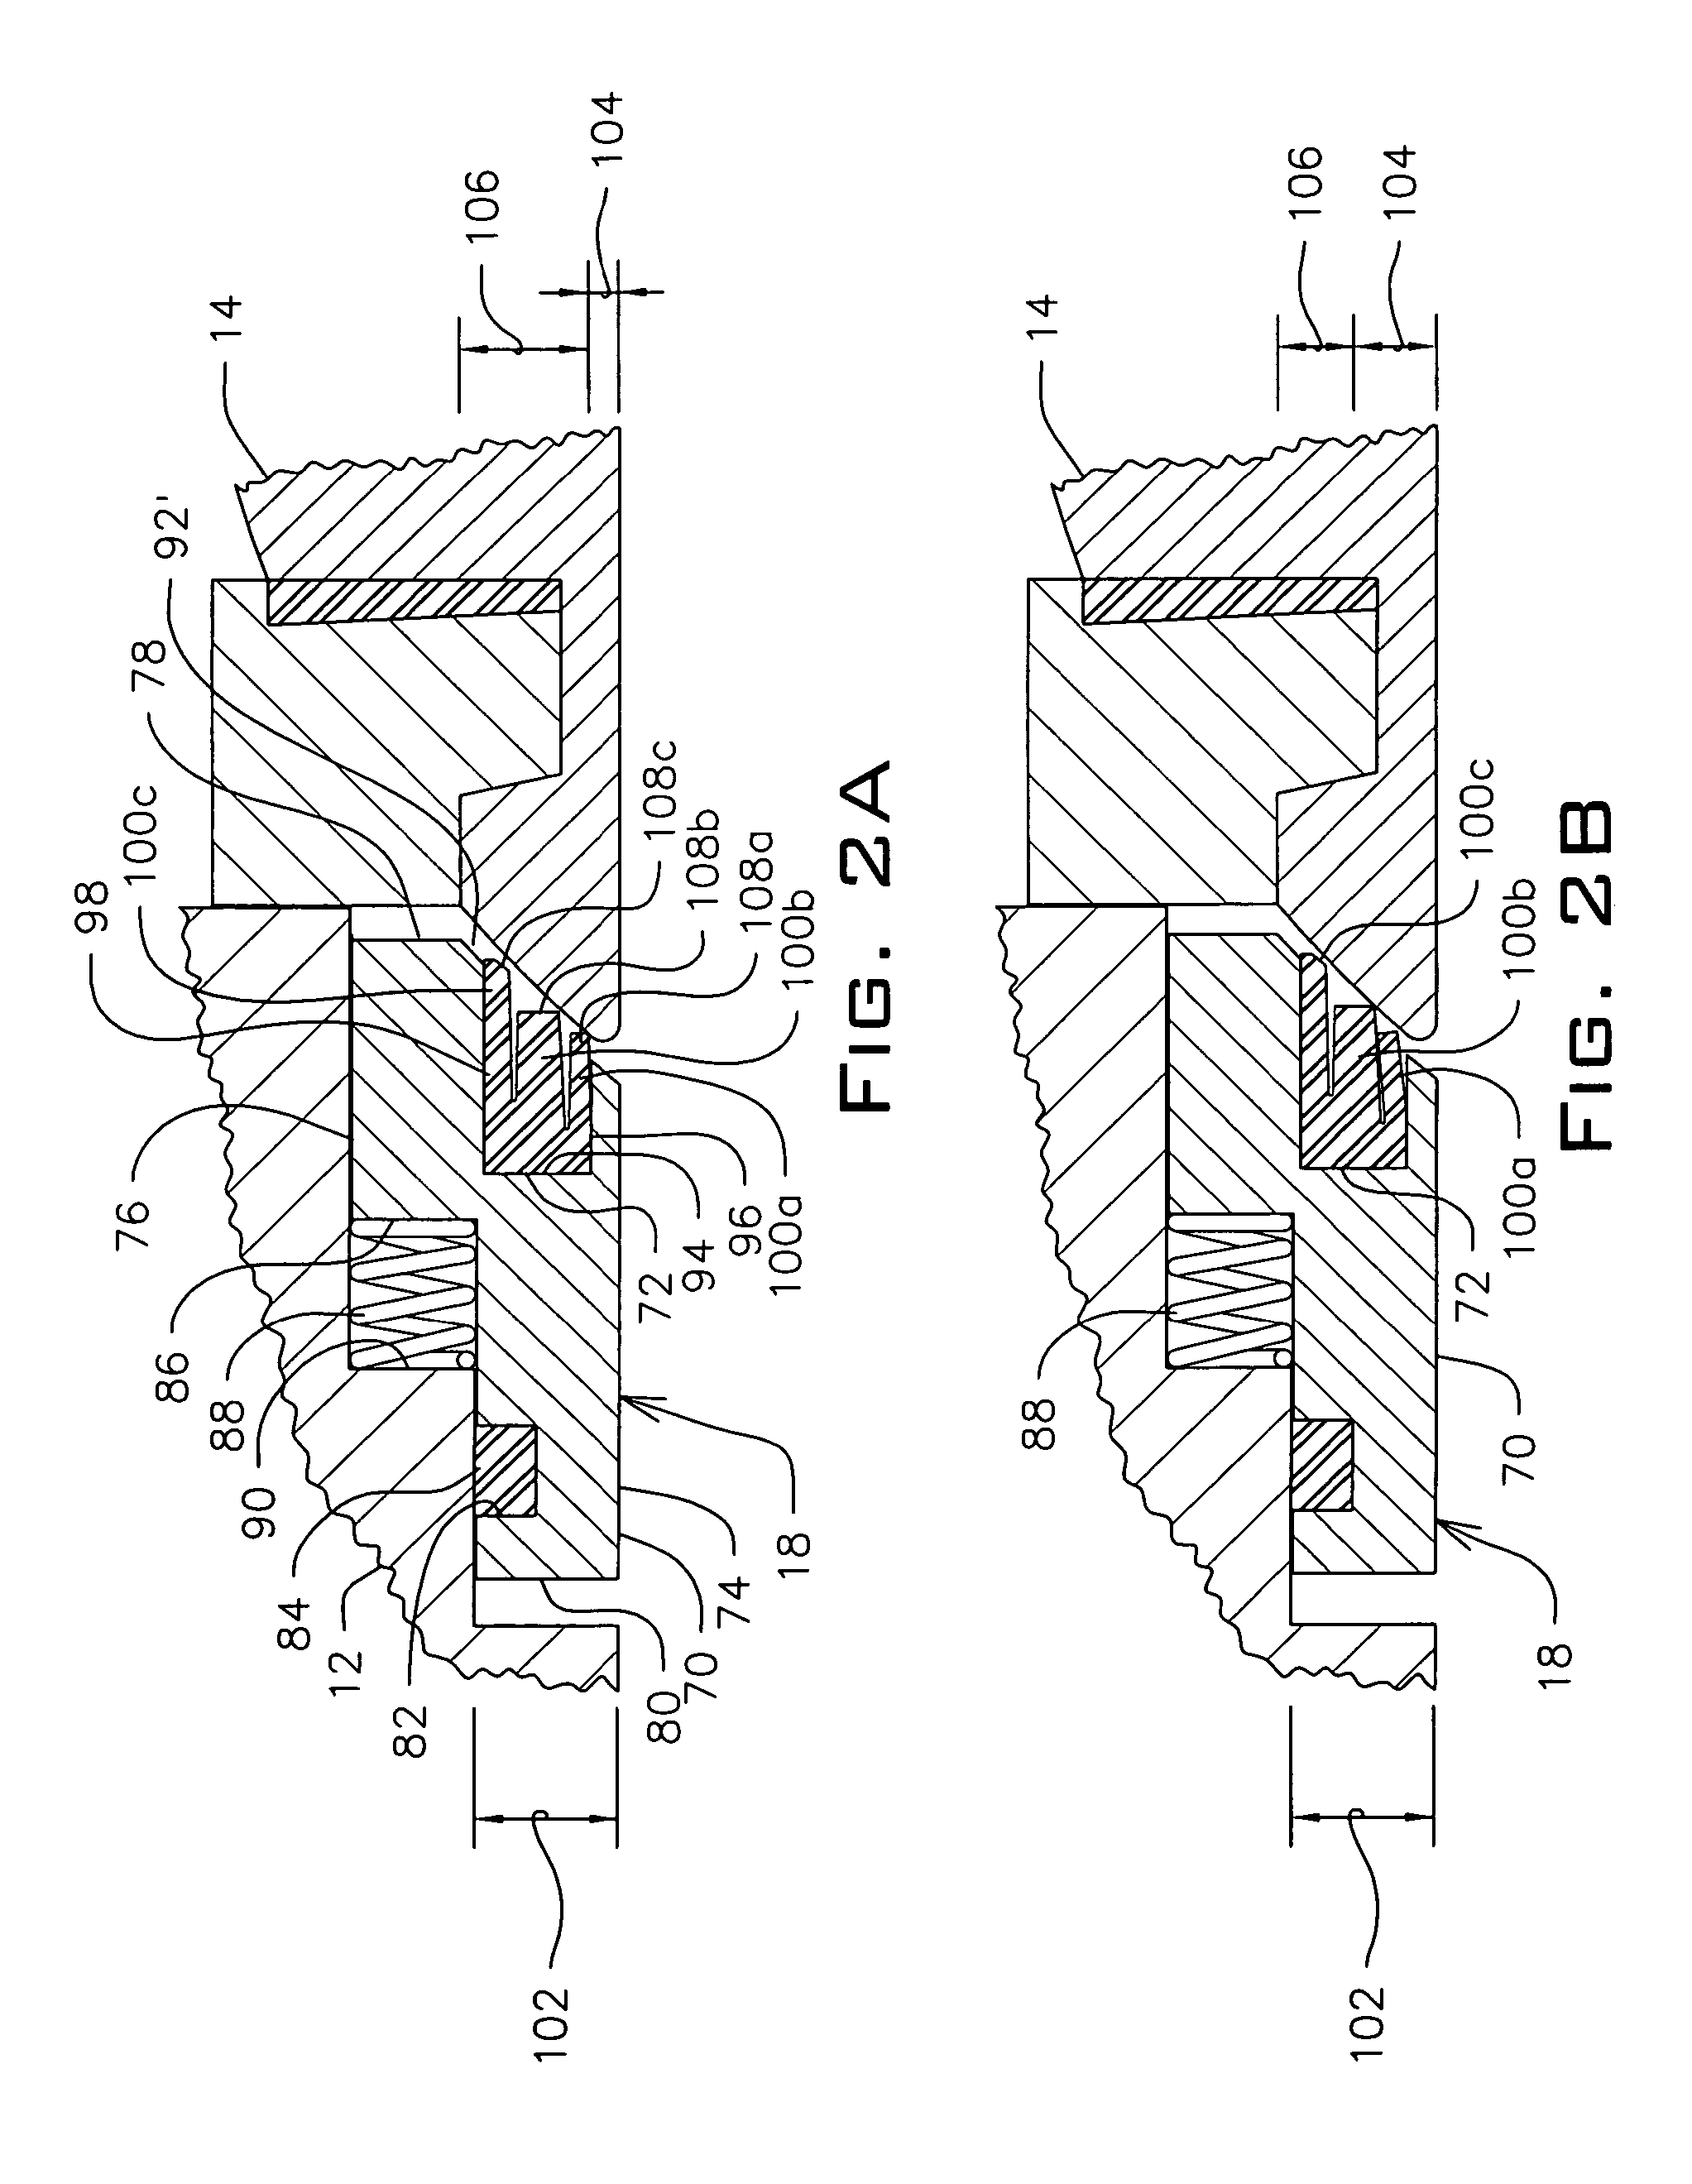 Valve with pressure adaptable seat